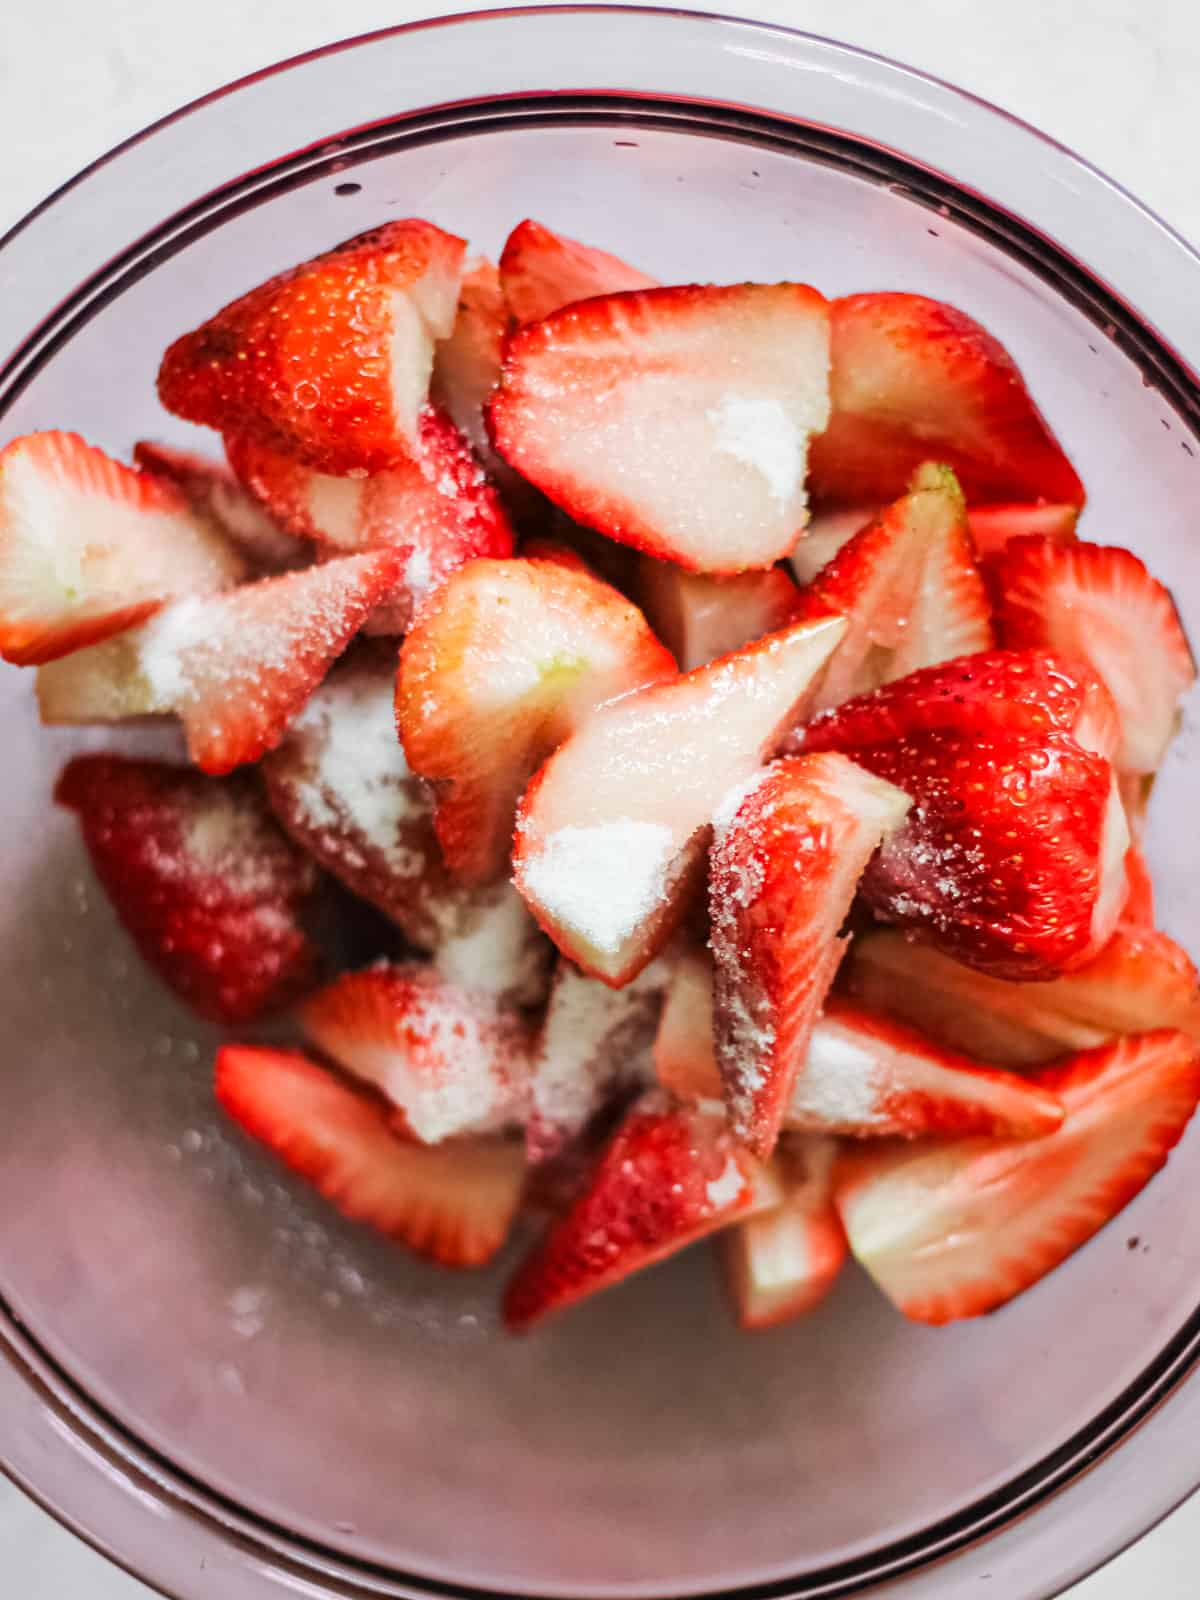 Up-close image of strawberries in bowl with sugar on them.